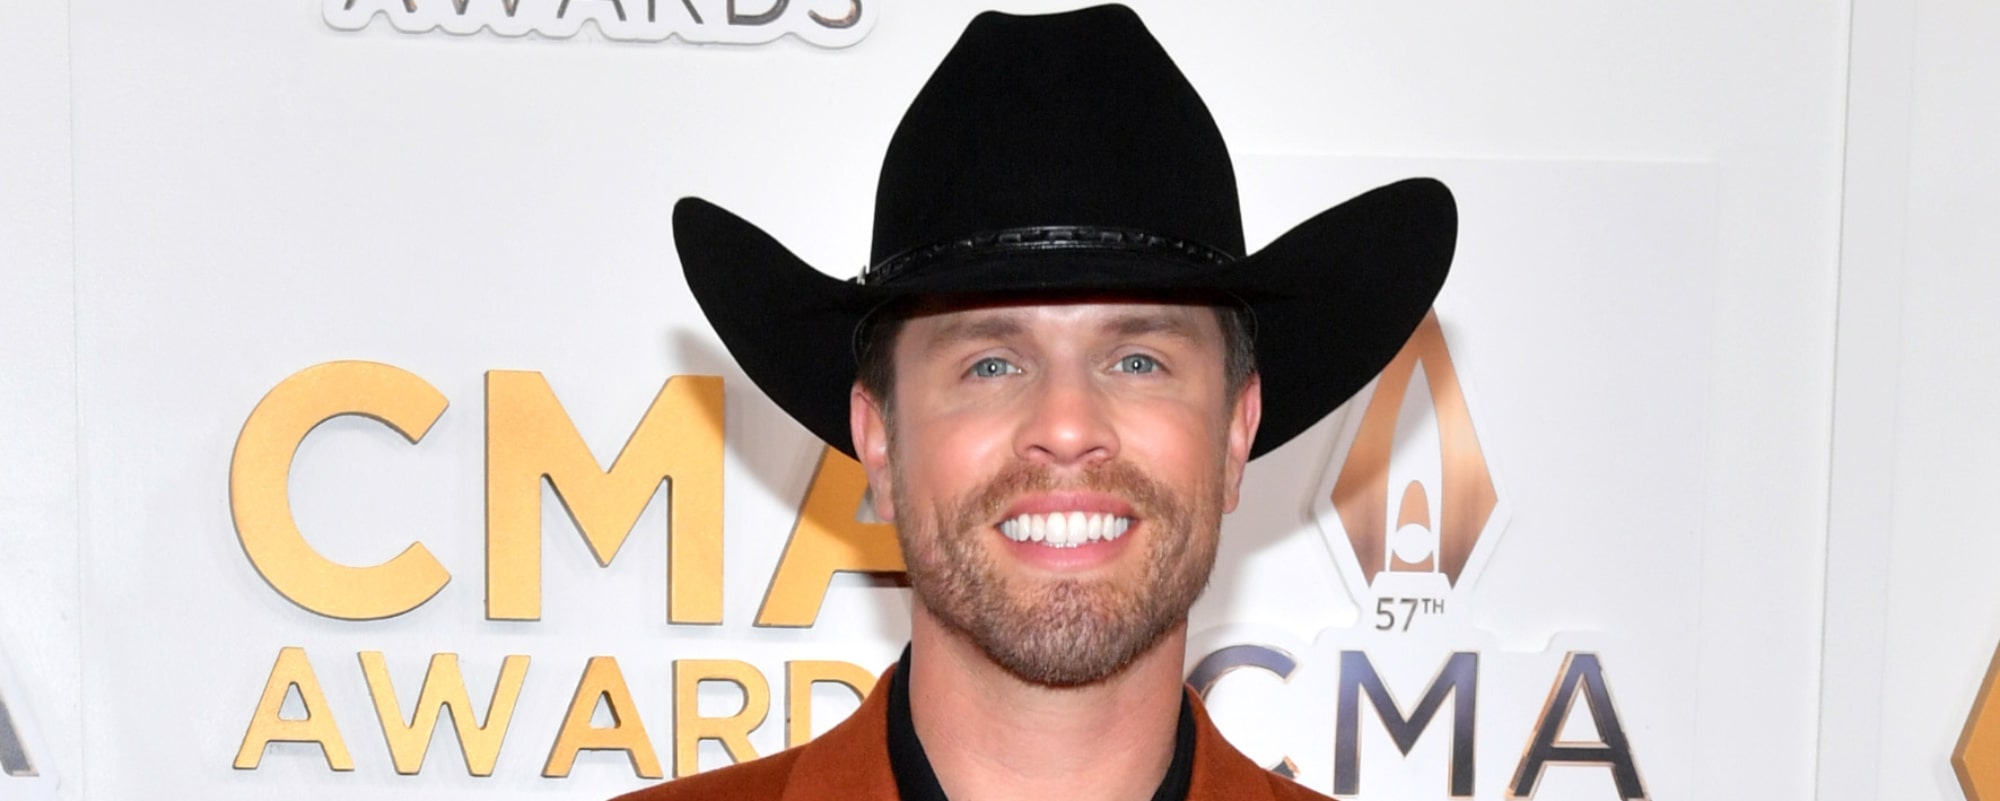 8th Annual Dustin Lynch and Friends Benefit Concert Raises $40k for Tennessee Charities